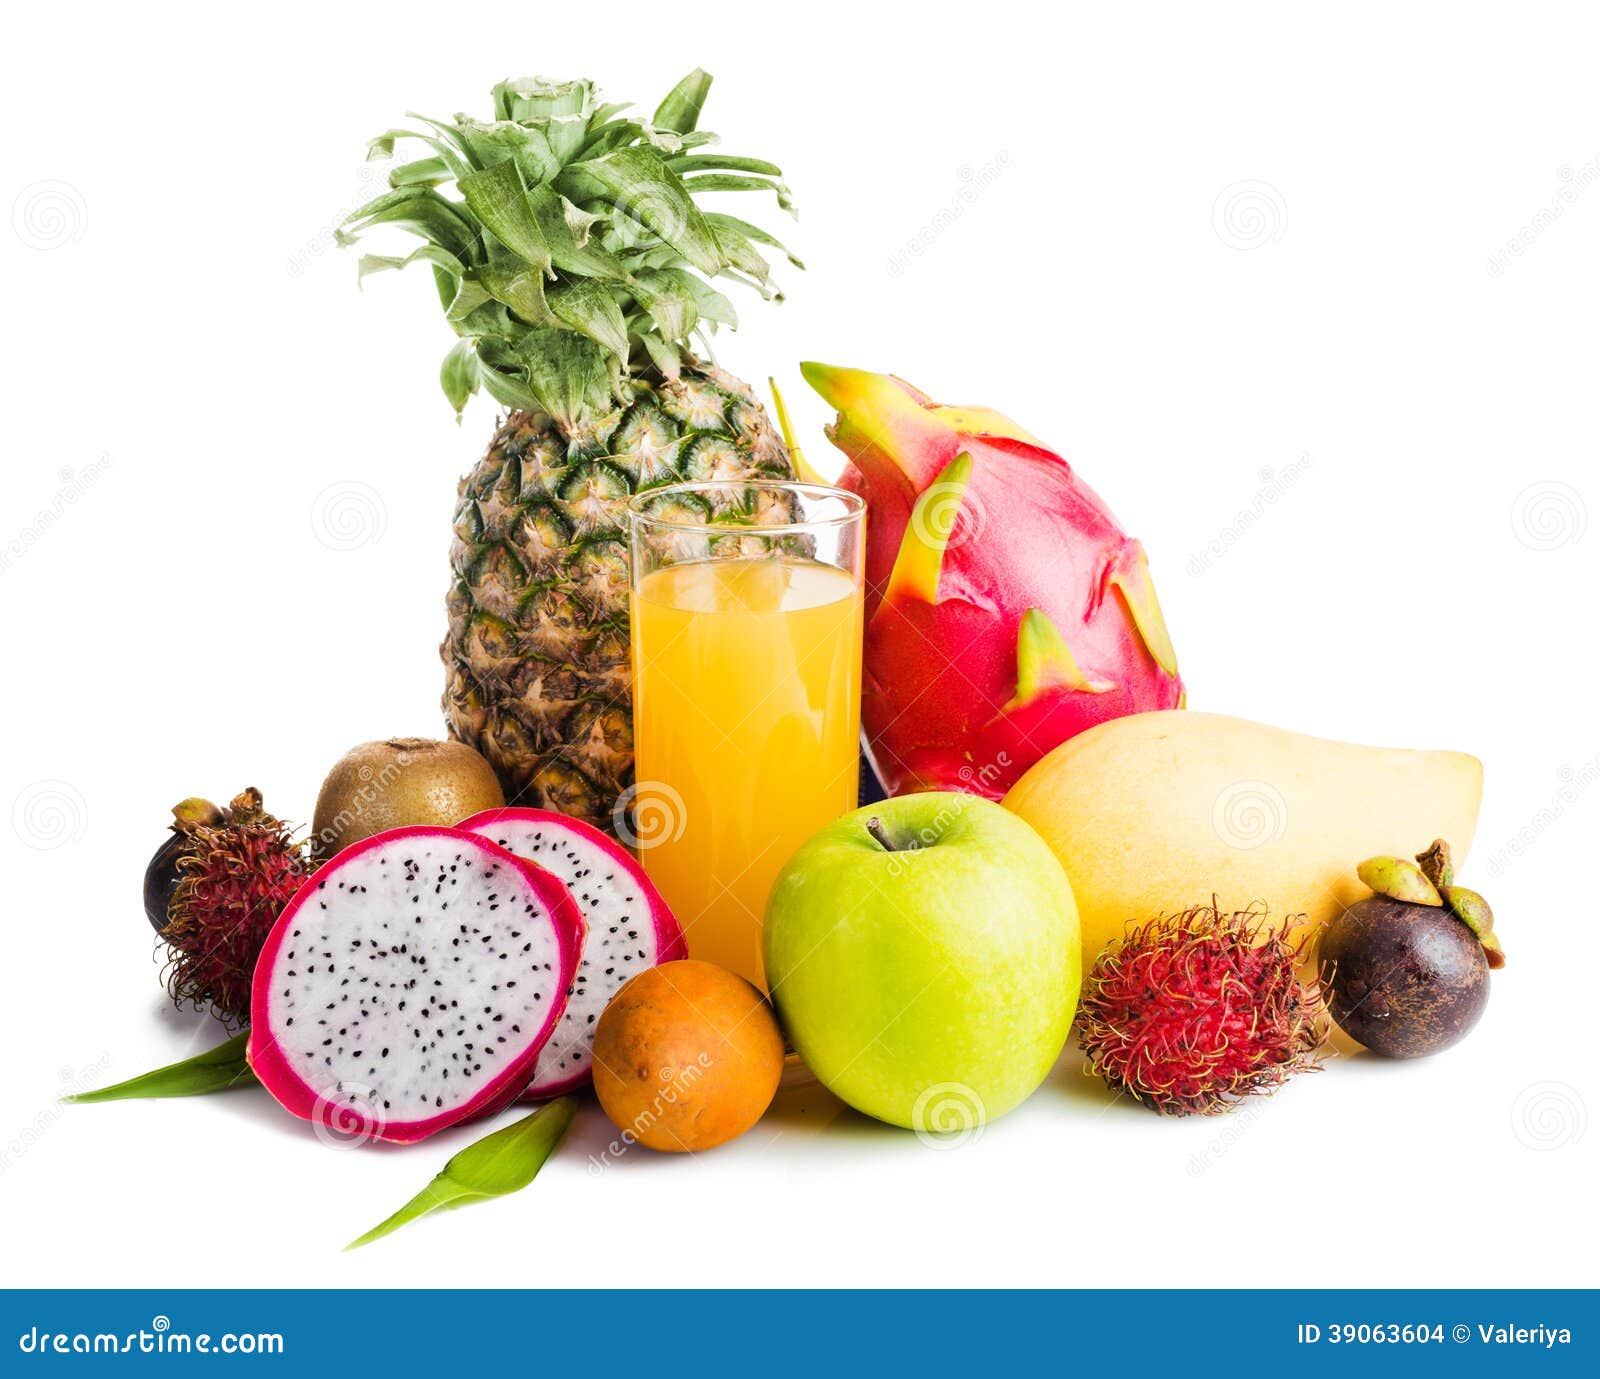 juice in glass and tropical fruit stock photo - image: 39063604